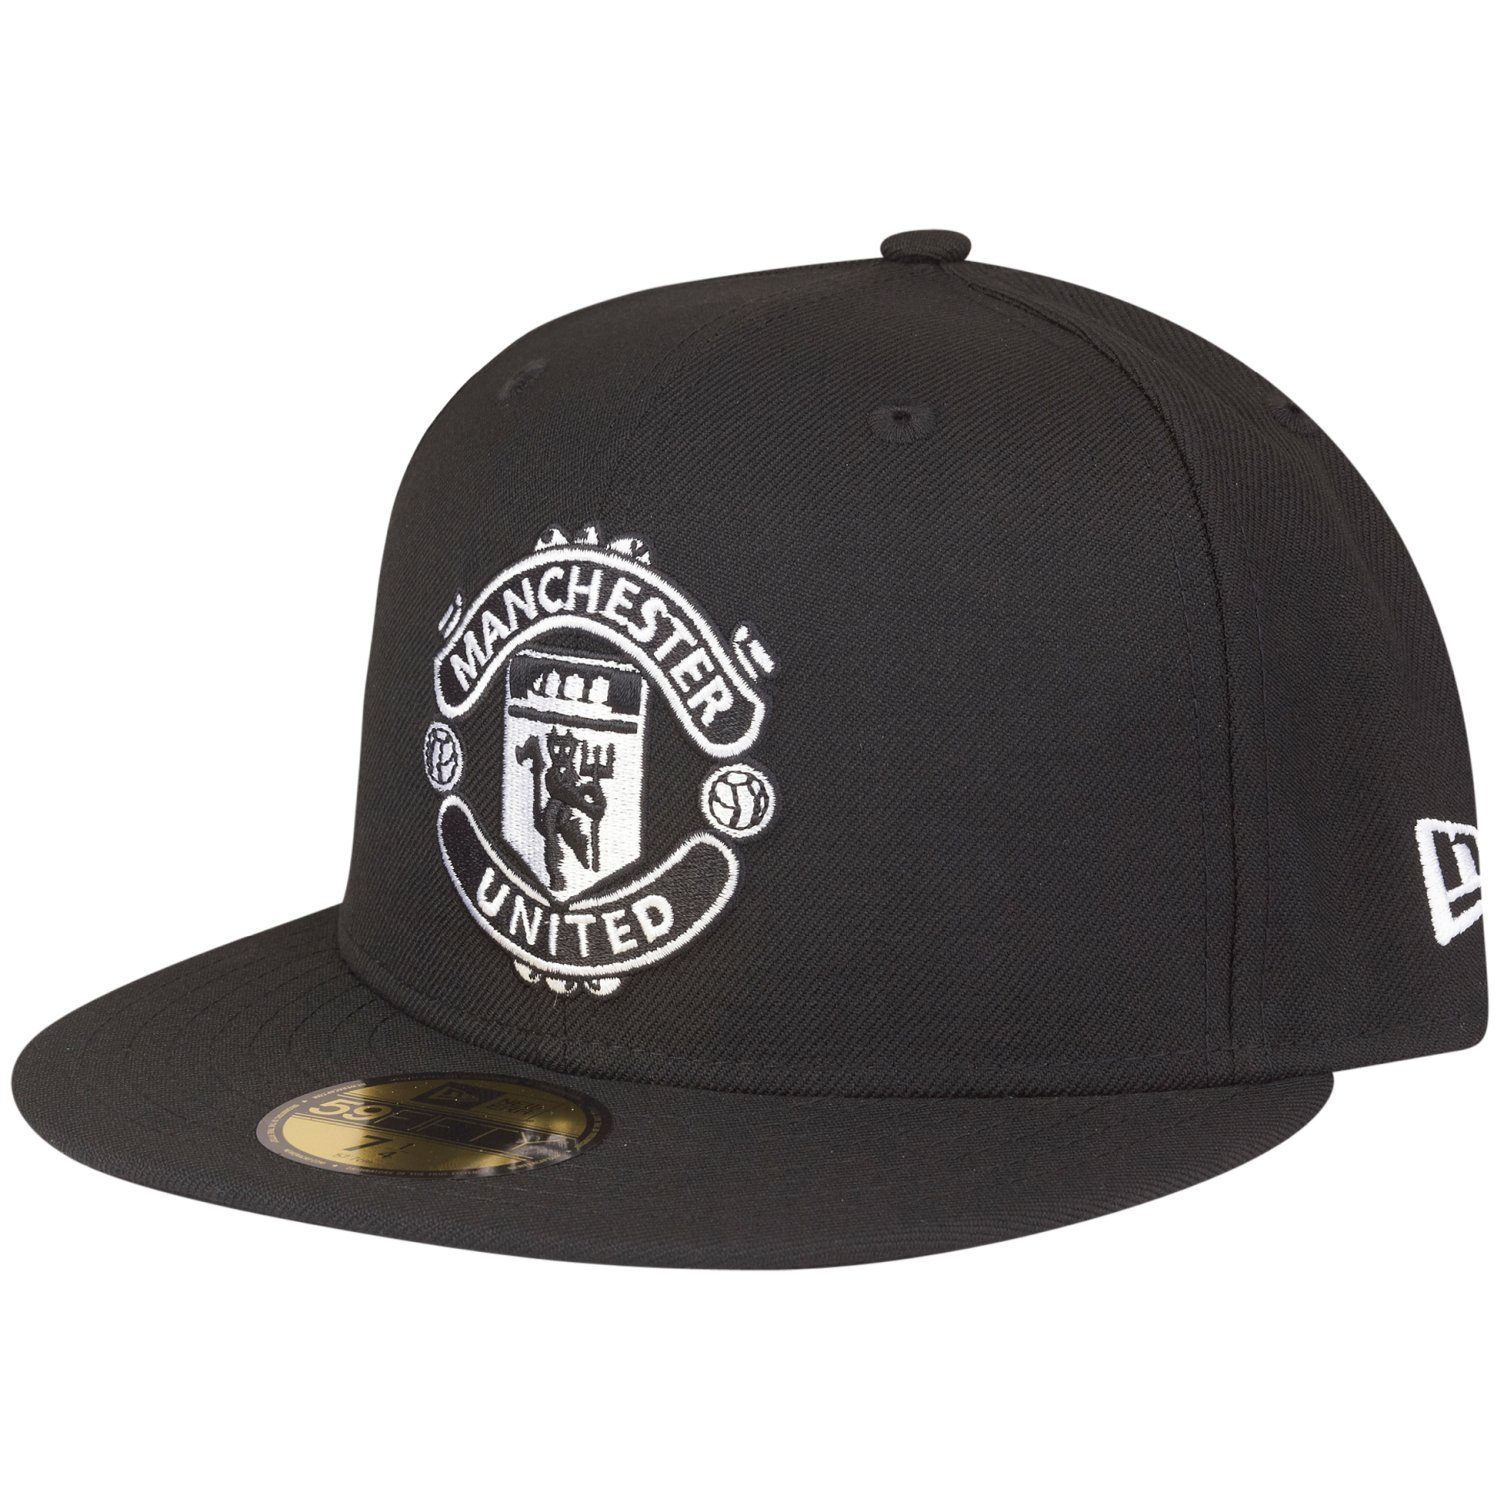 New Era Fitted Cap 59Fifty Manchester United F.C.